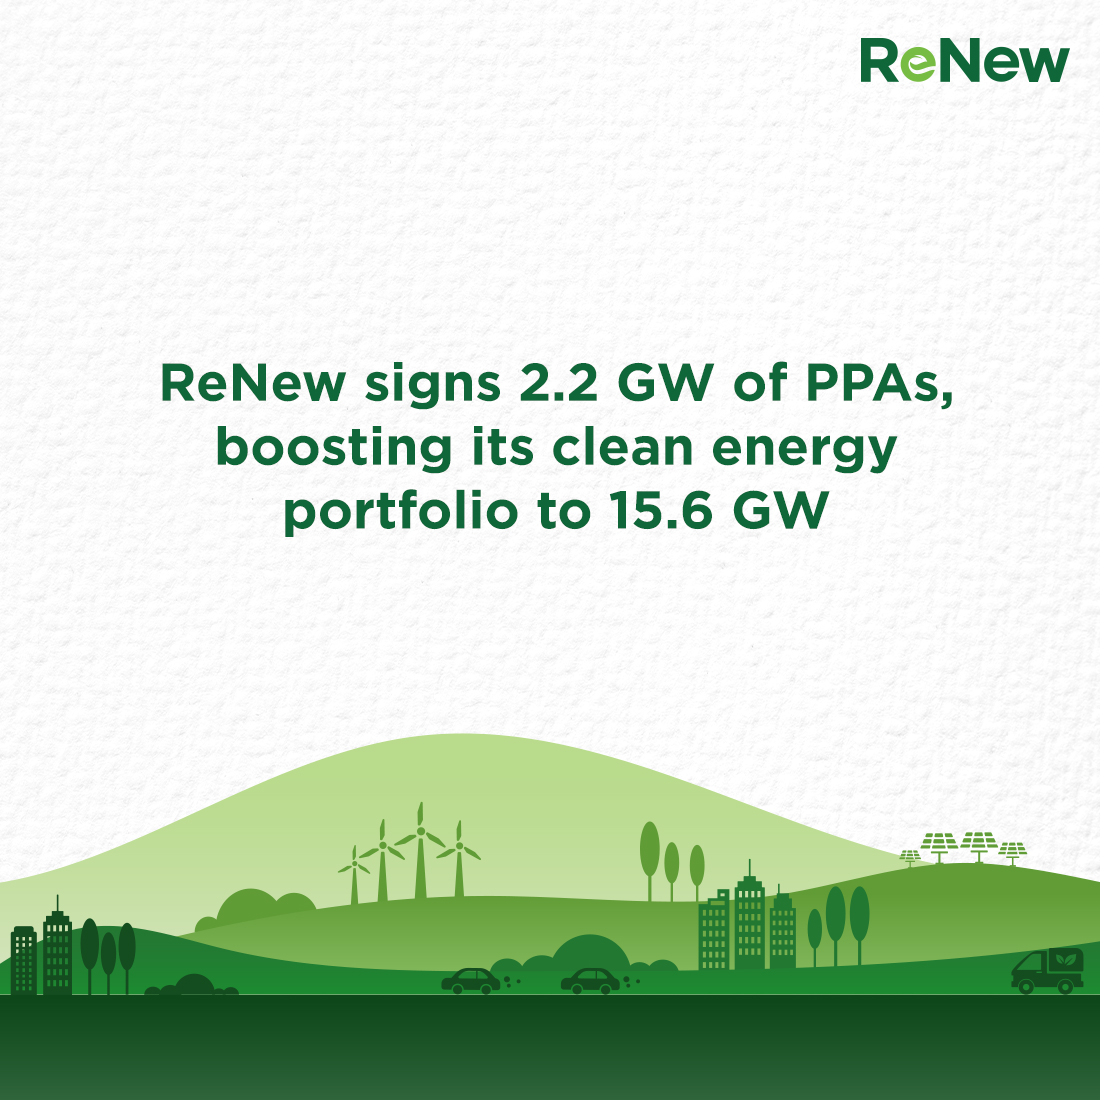 New PPAs involve the development of 1,500 MW of solar and 688 MW of wind projects and are expected to be commissioned over the next 24 months. ReNew’s portfolio now stands at 15.6 GW, consolidating its position as the major player in India’s green energy transition. Find out…